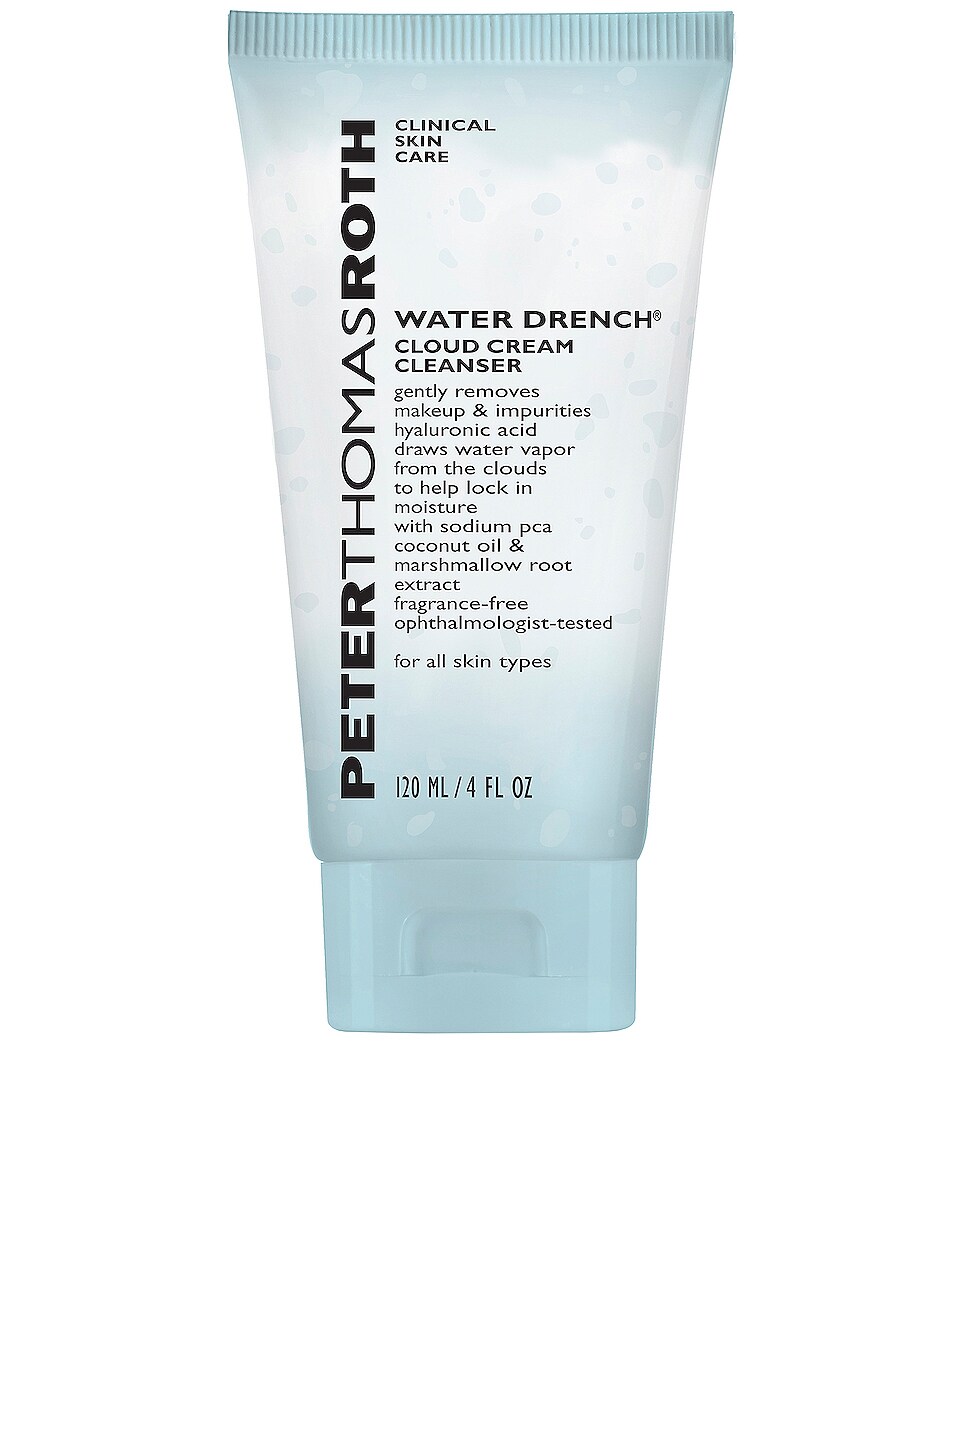 Peter Thomas Roth WATER DRENCH CLOUD CREAM CLEANSER.